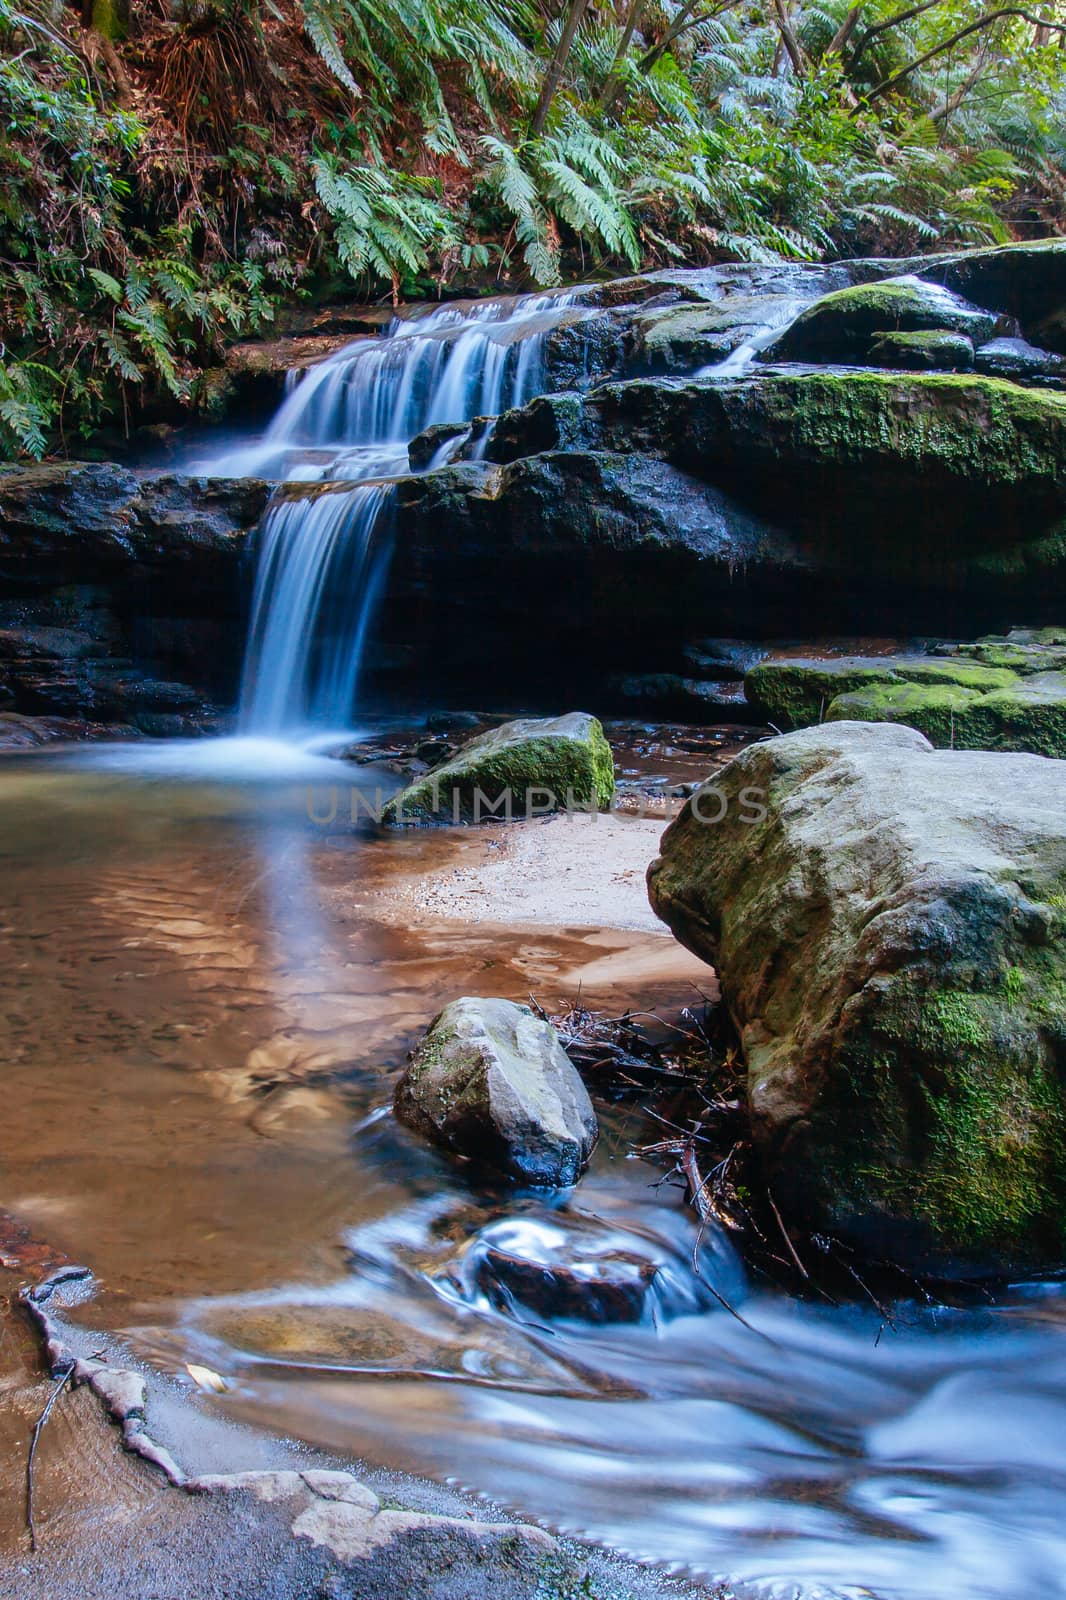 Water cascading over rocks early in the morning in Leura Cascades, New South Wales, Australia